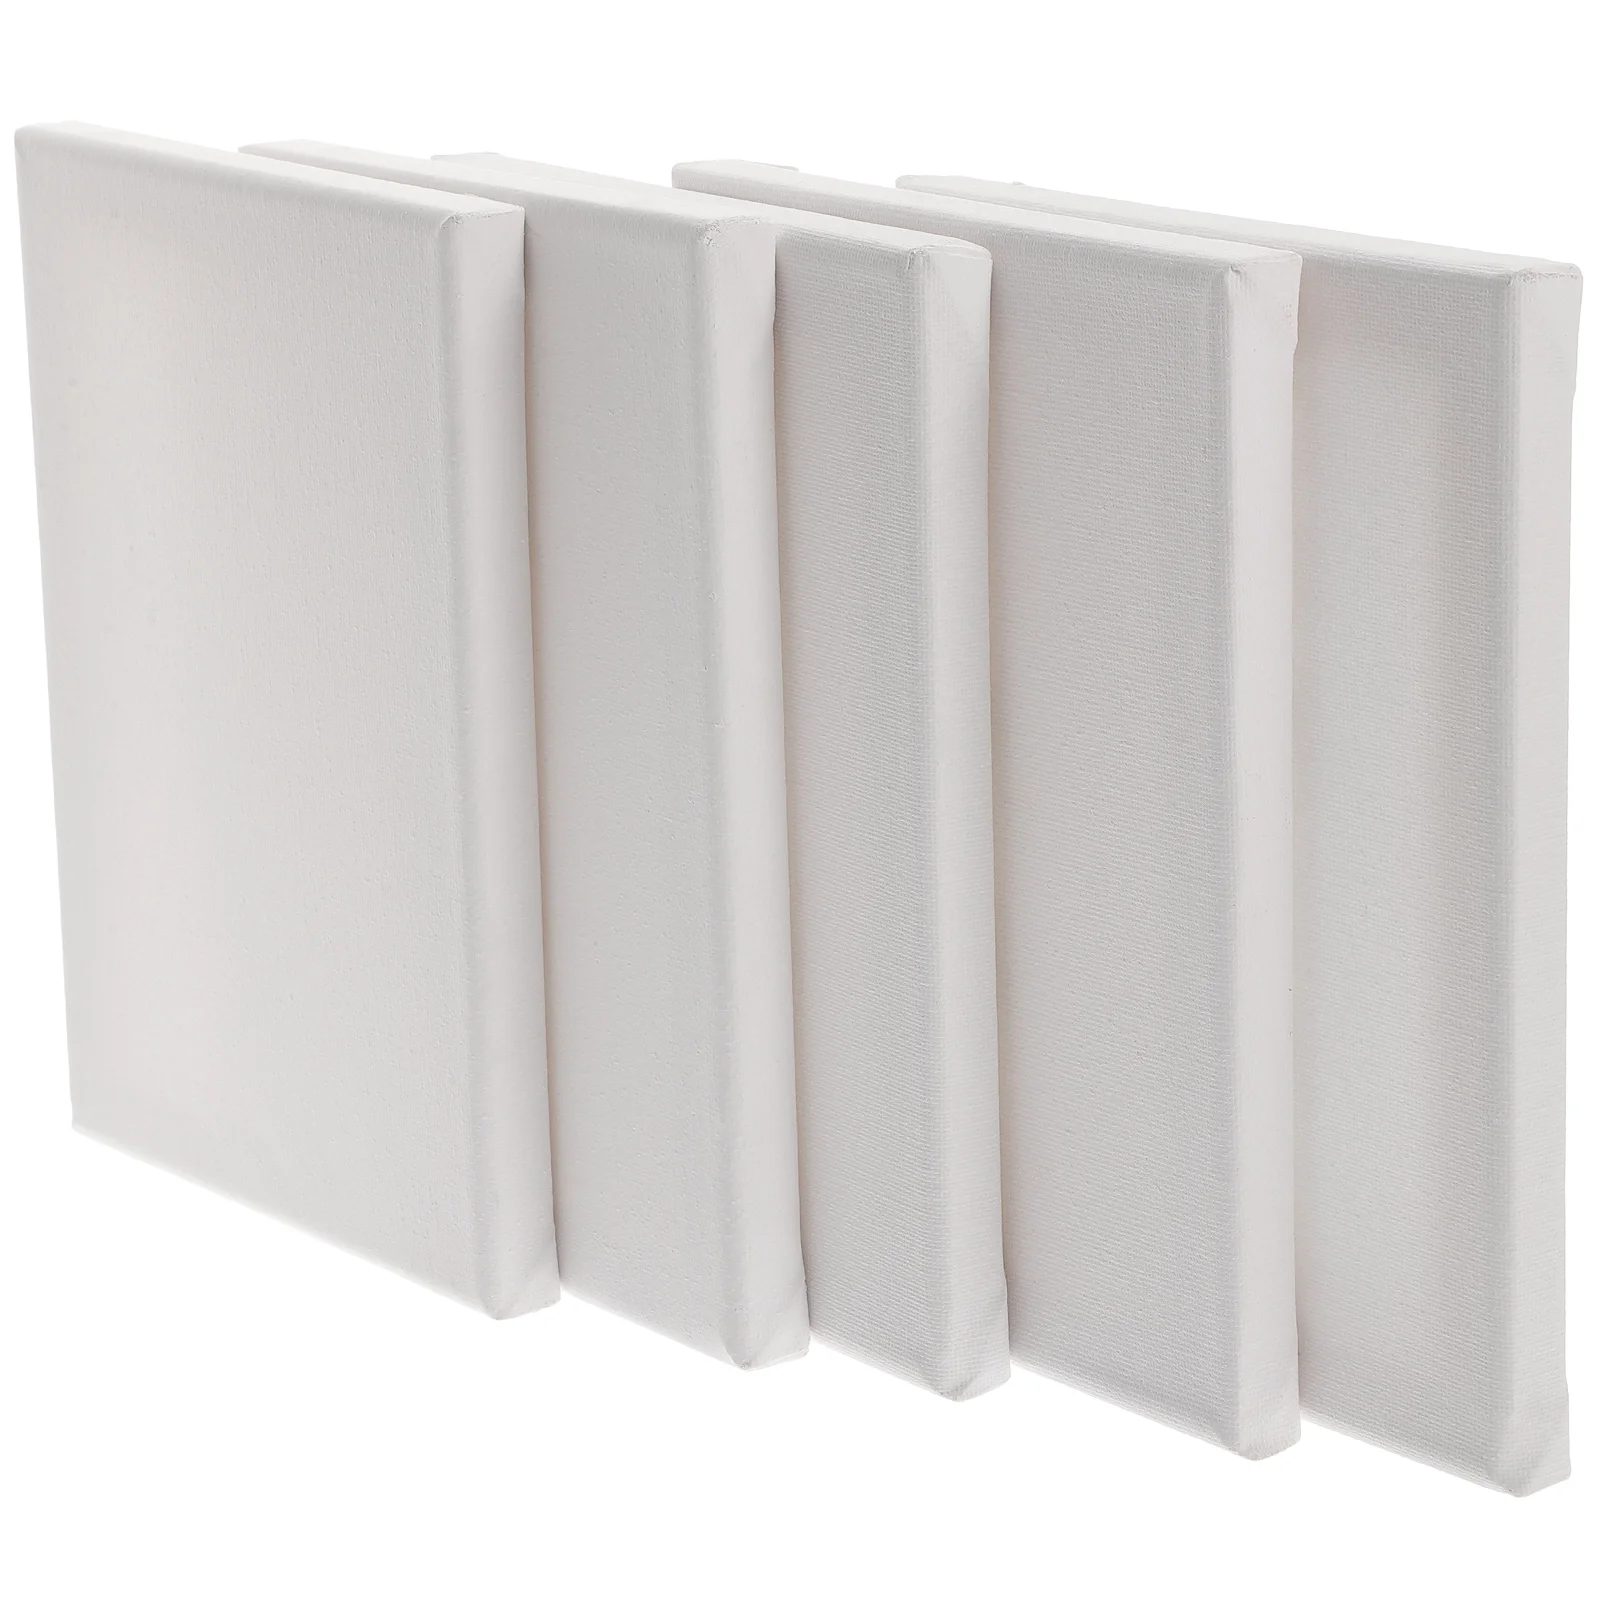 5 Pcs Mini Frames Blank Canvas Paint Suite Small Canvases Painting